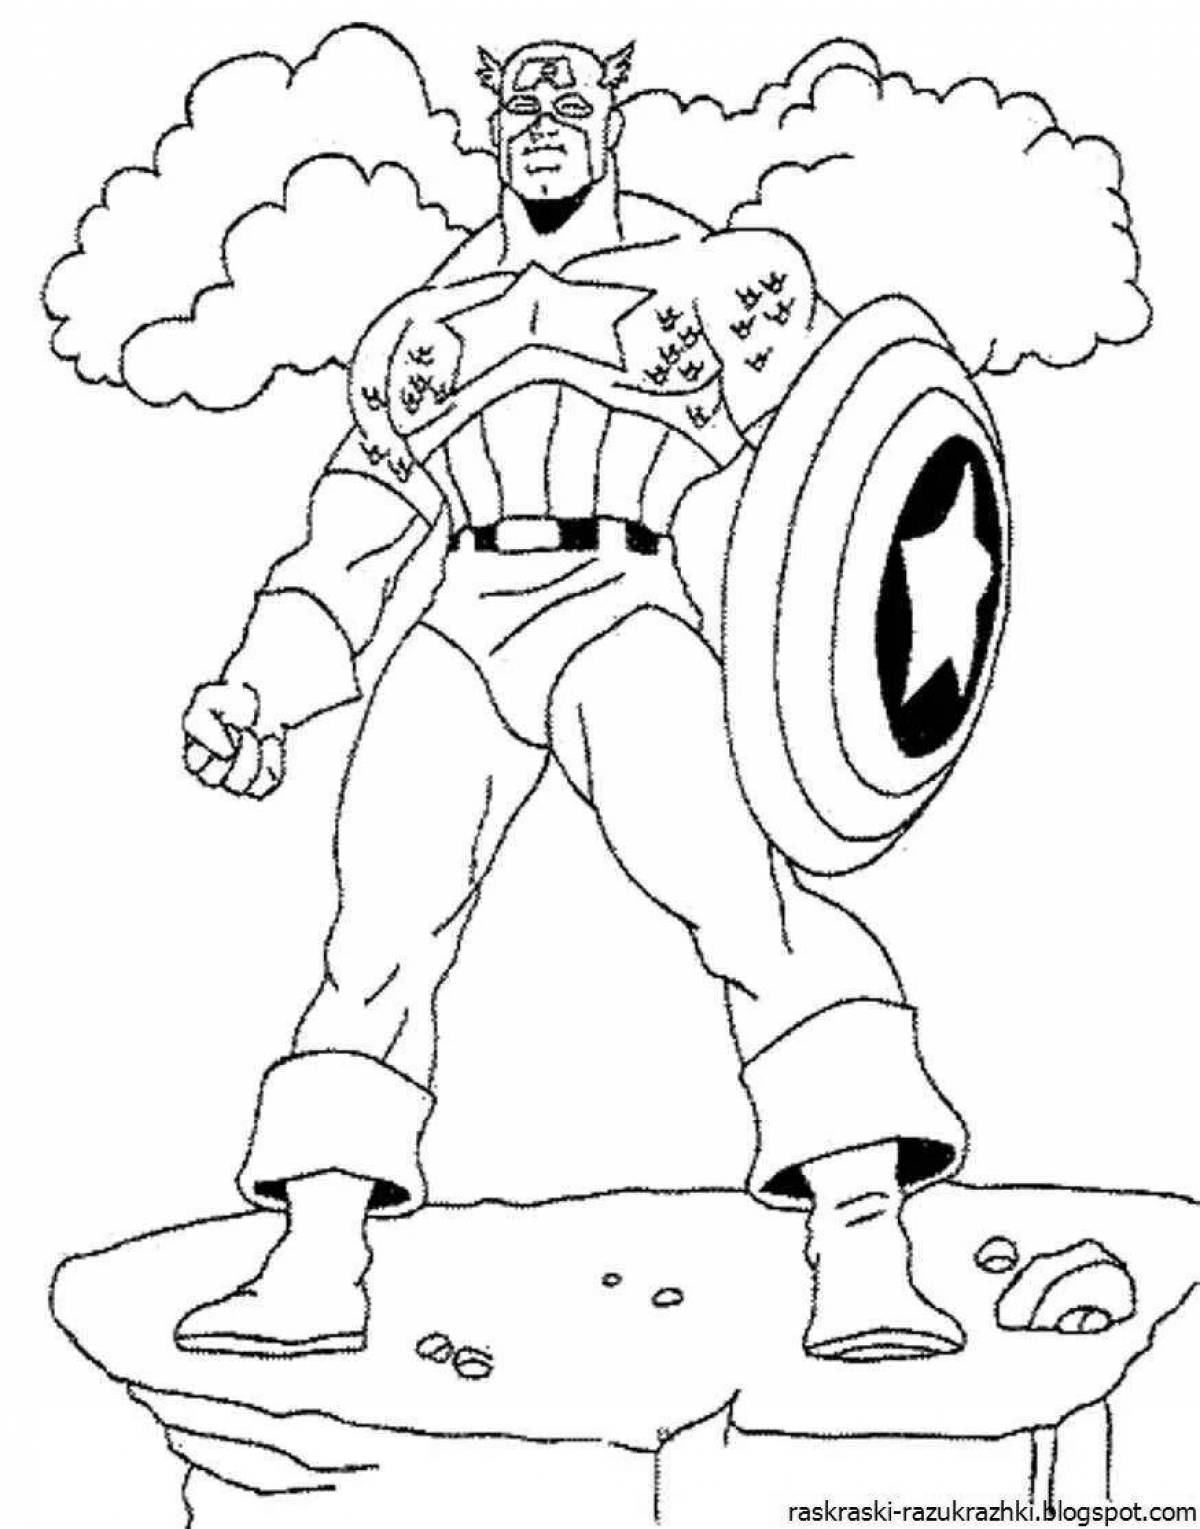 Charming captain america coloring pages for kids